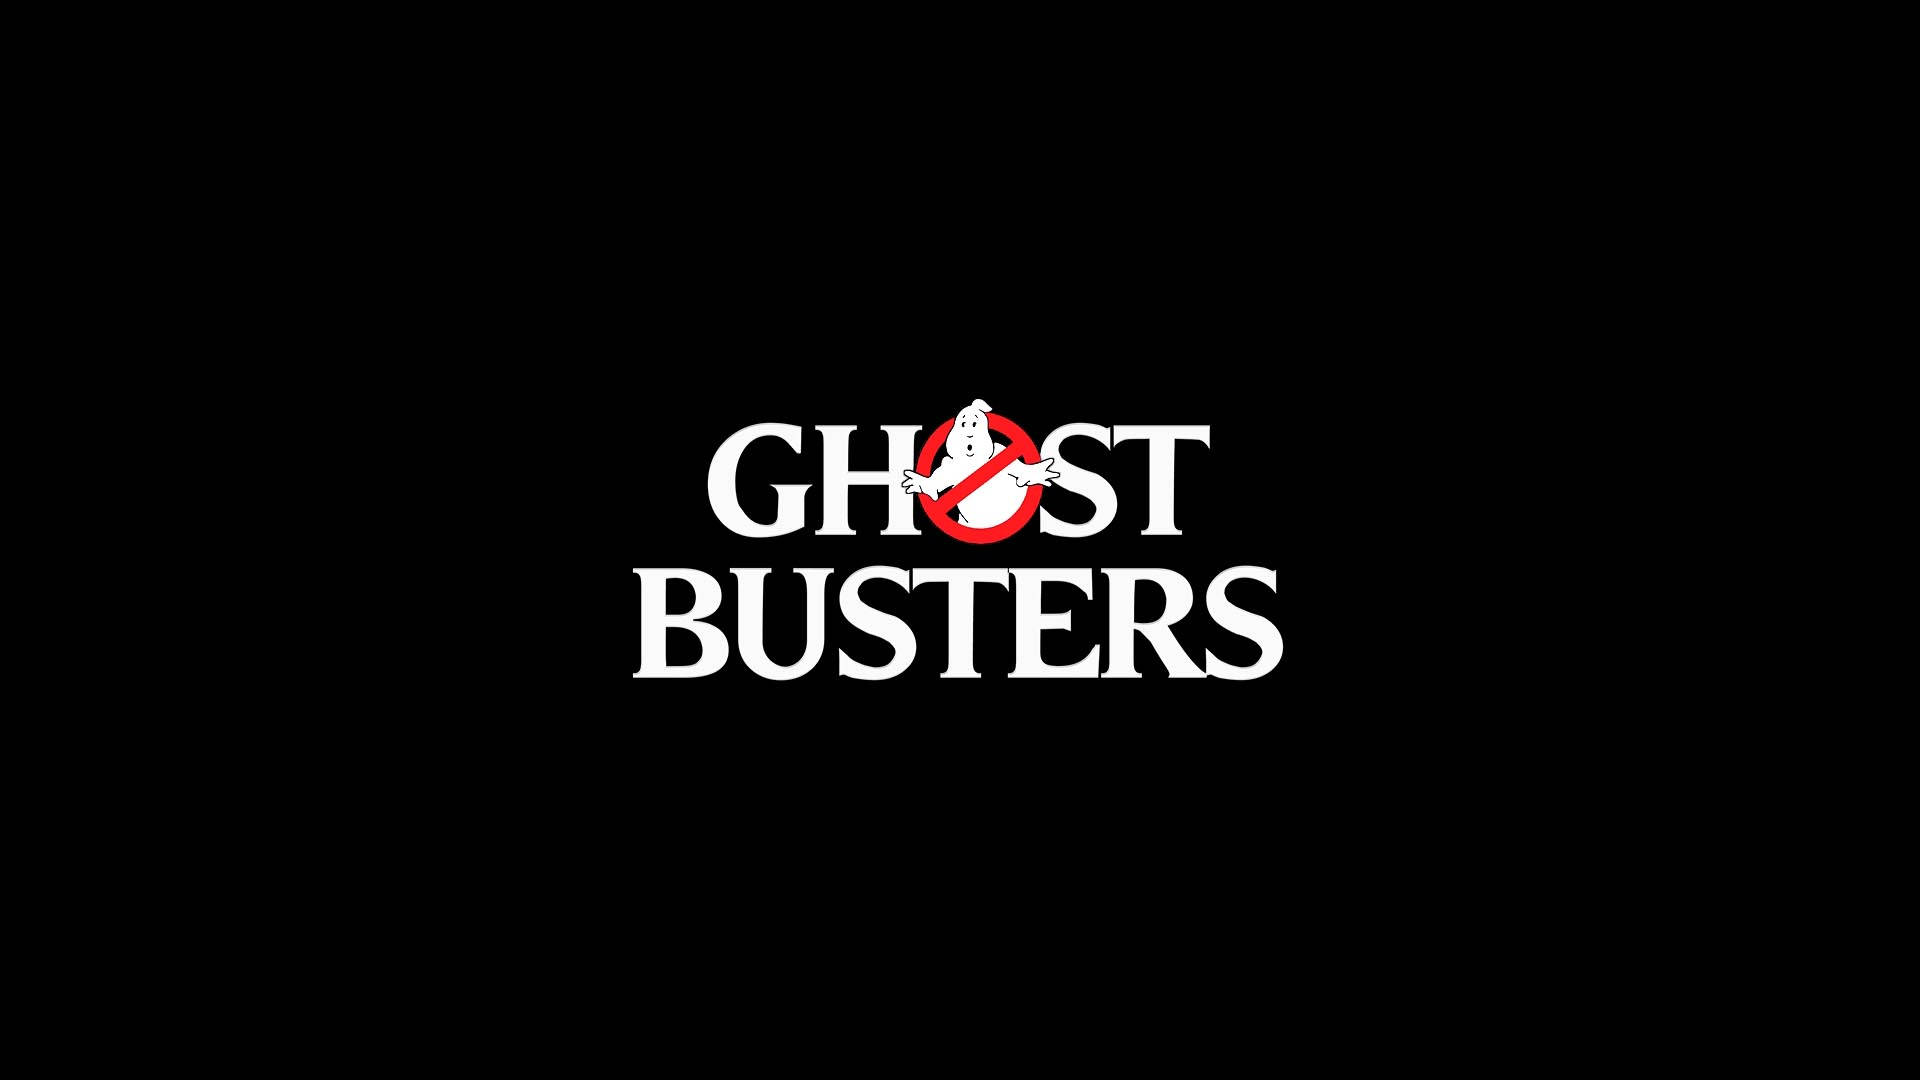 Stay Puft Marshmallow Man Joins the Ghostbusters Wallpaper